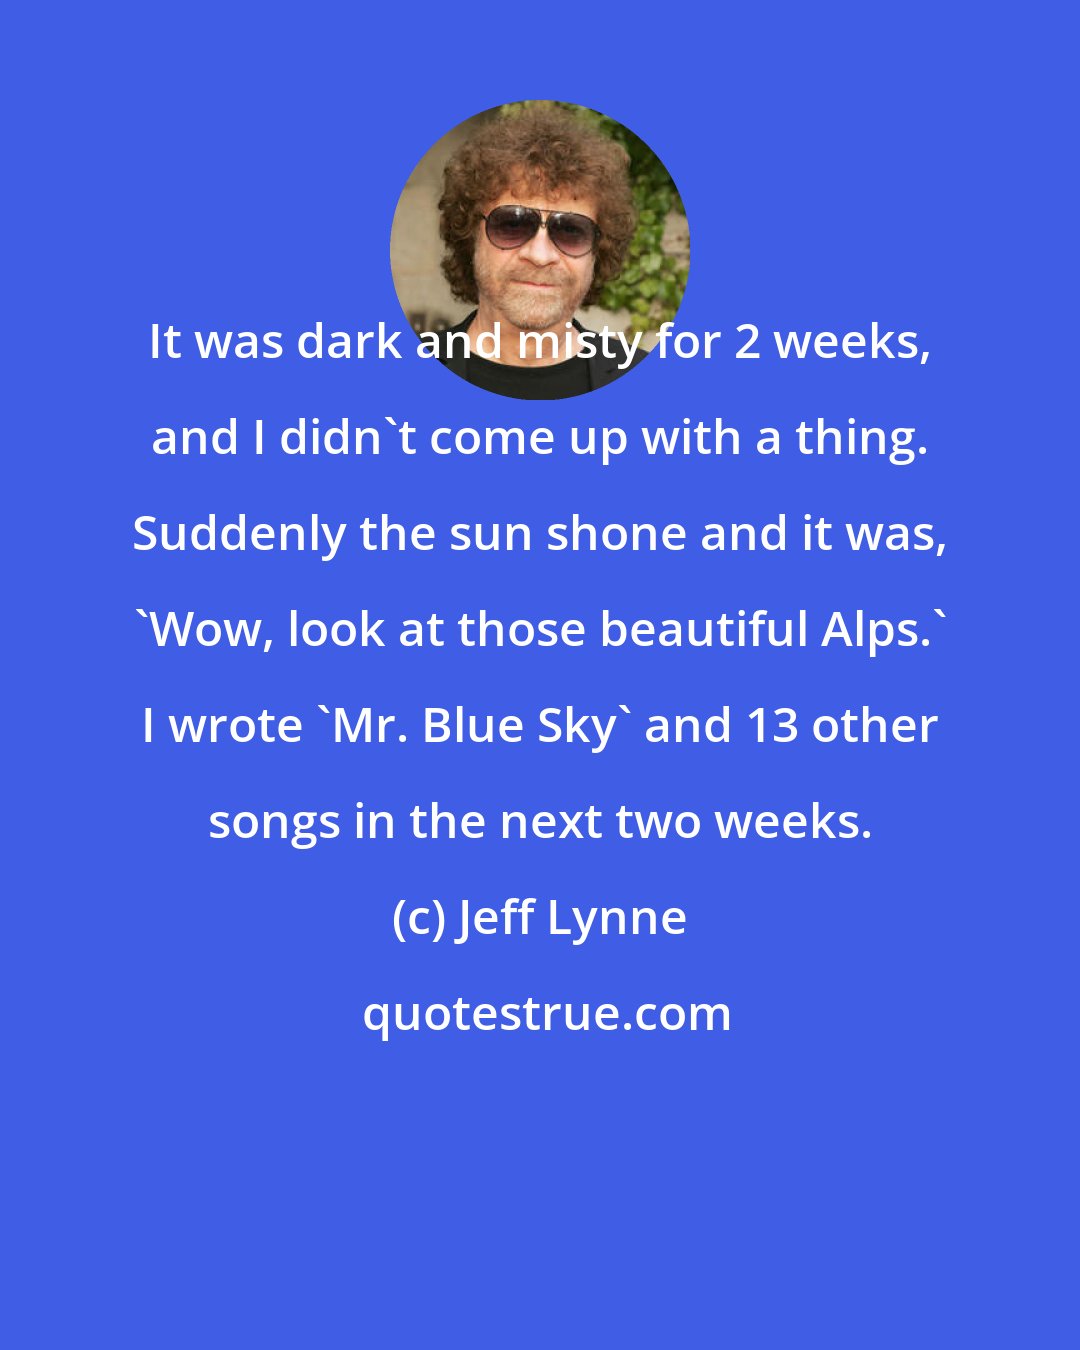 Jeff Lynne: It was dark and misty for 2 weeks, and I didn't come up with a thing. Suddenly the sun shone and it was, 'Wow, look at those beautiful Alps.' I wrote 'Mr. Blue Sky' and 13 other songs in the next two weeks.